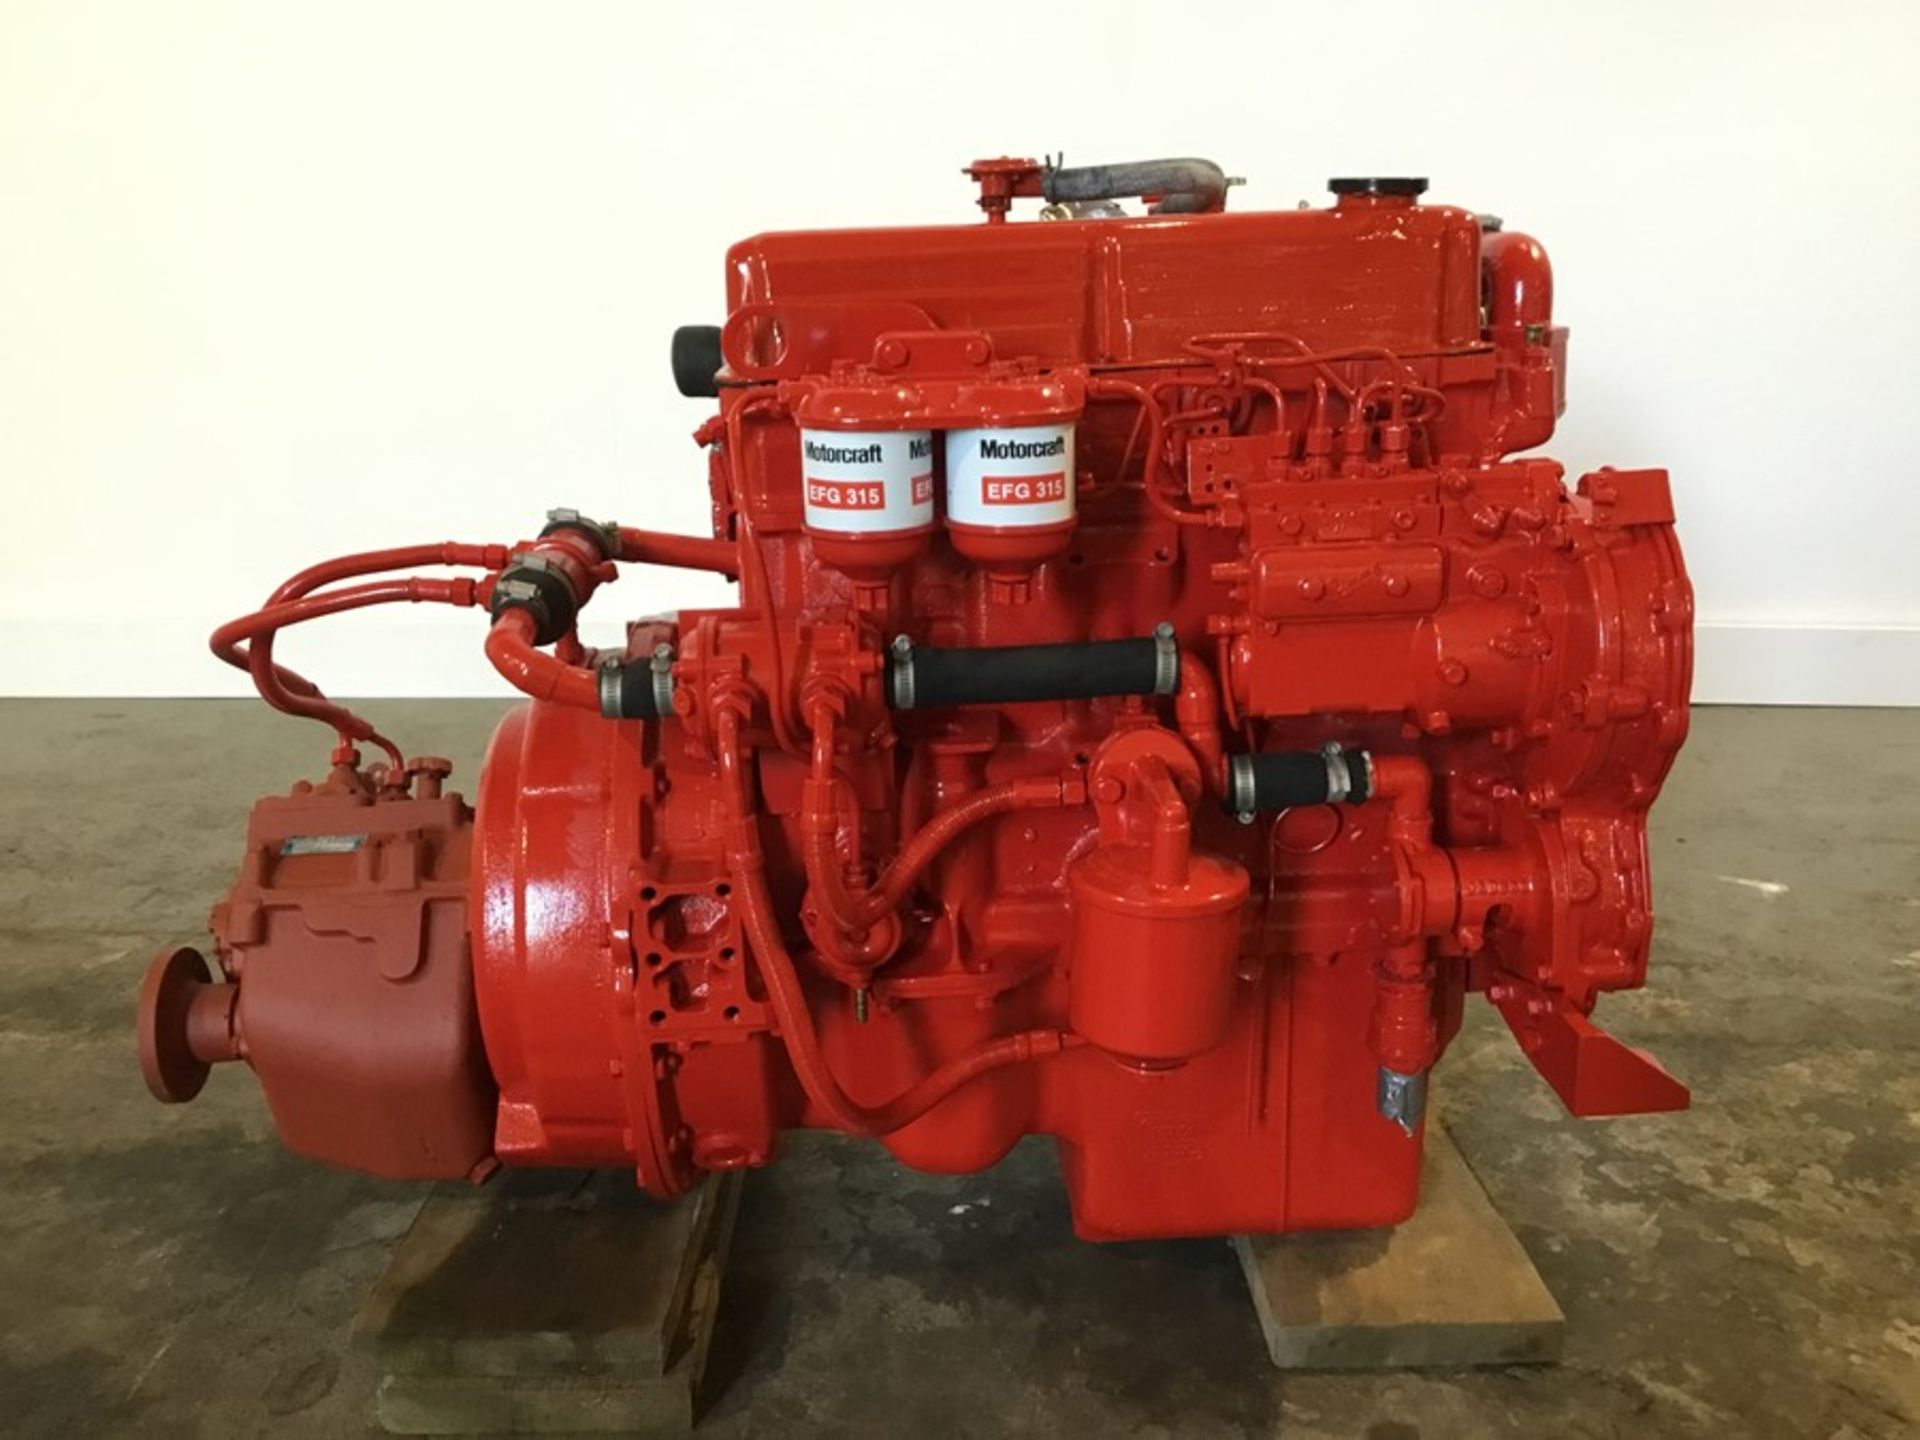 Ford 2712e Marine Diesel engine: Ford 2712E 4cyl non Turbo c/w PRM 160VRF3 Gearbox Low hours